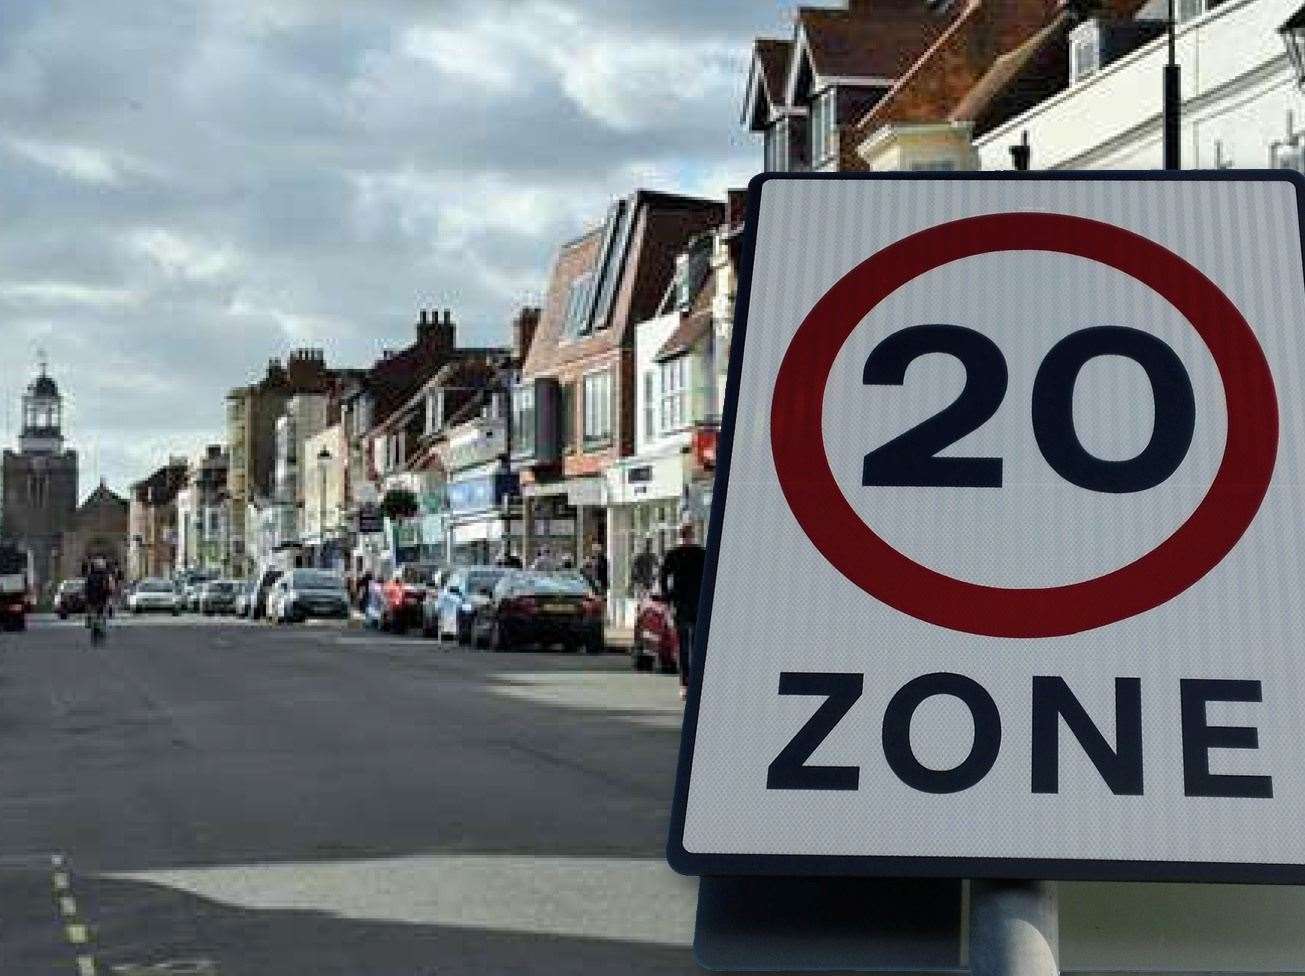 20mph zones have popped up around the county